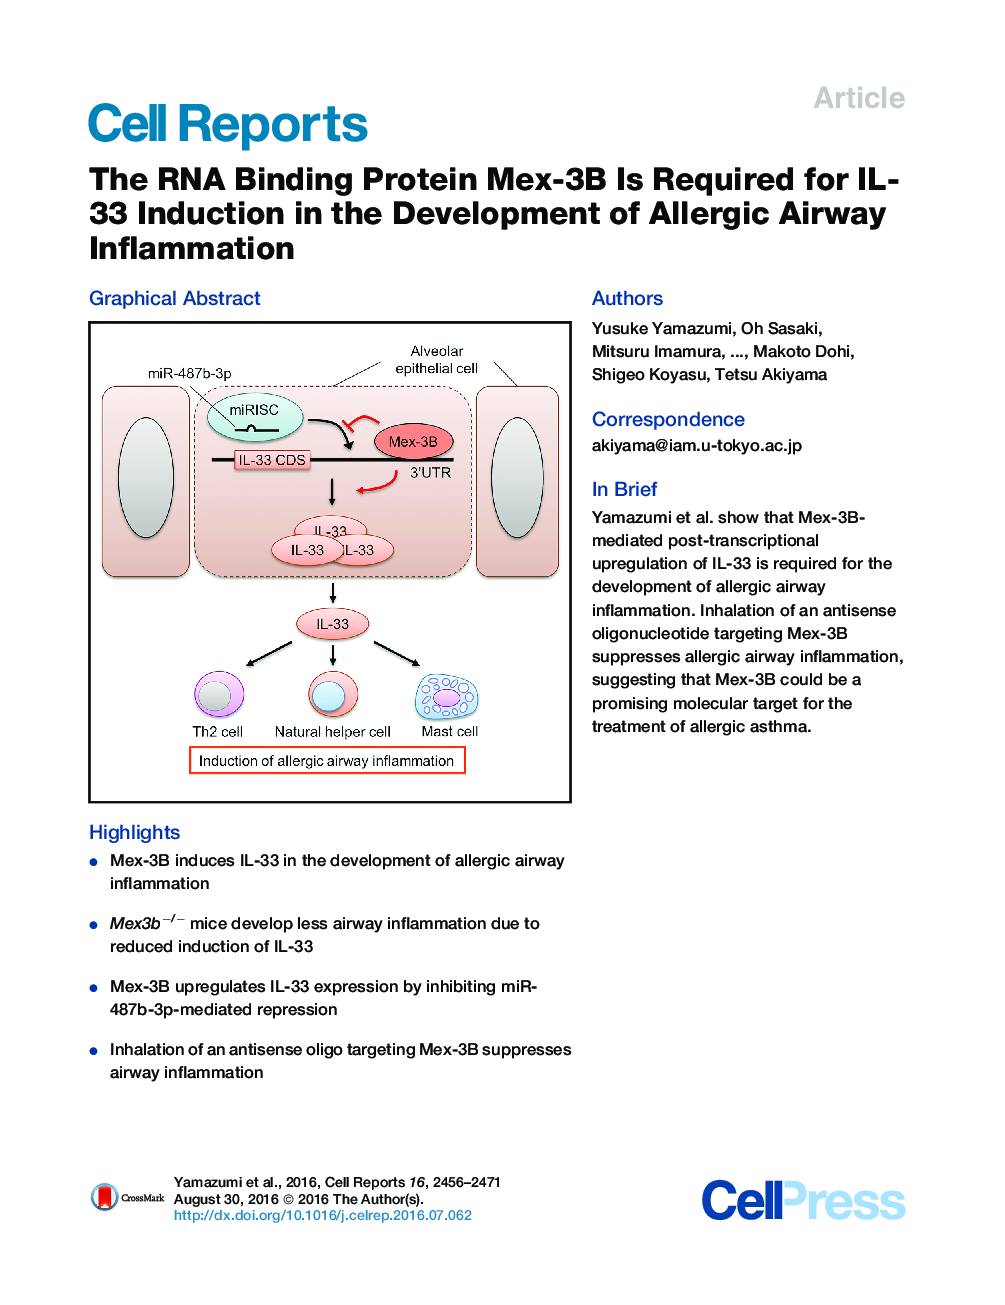 The RNA Binding Protein Mex-3B Is Required for IL-33 Induction in the Development of Allergic Airway Inflammation